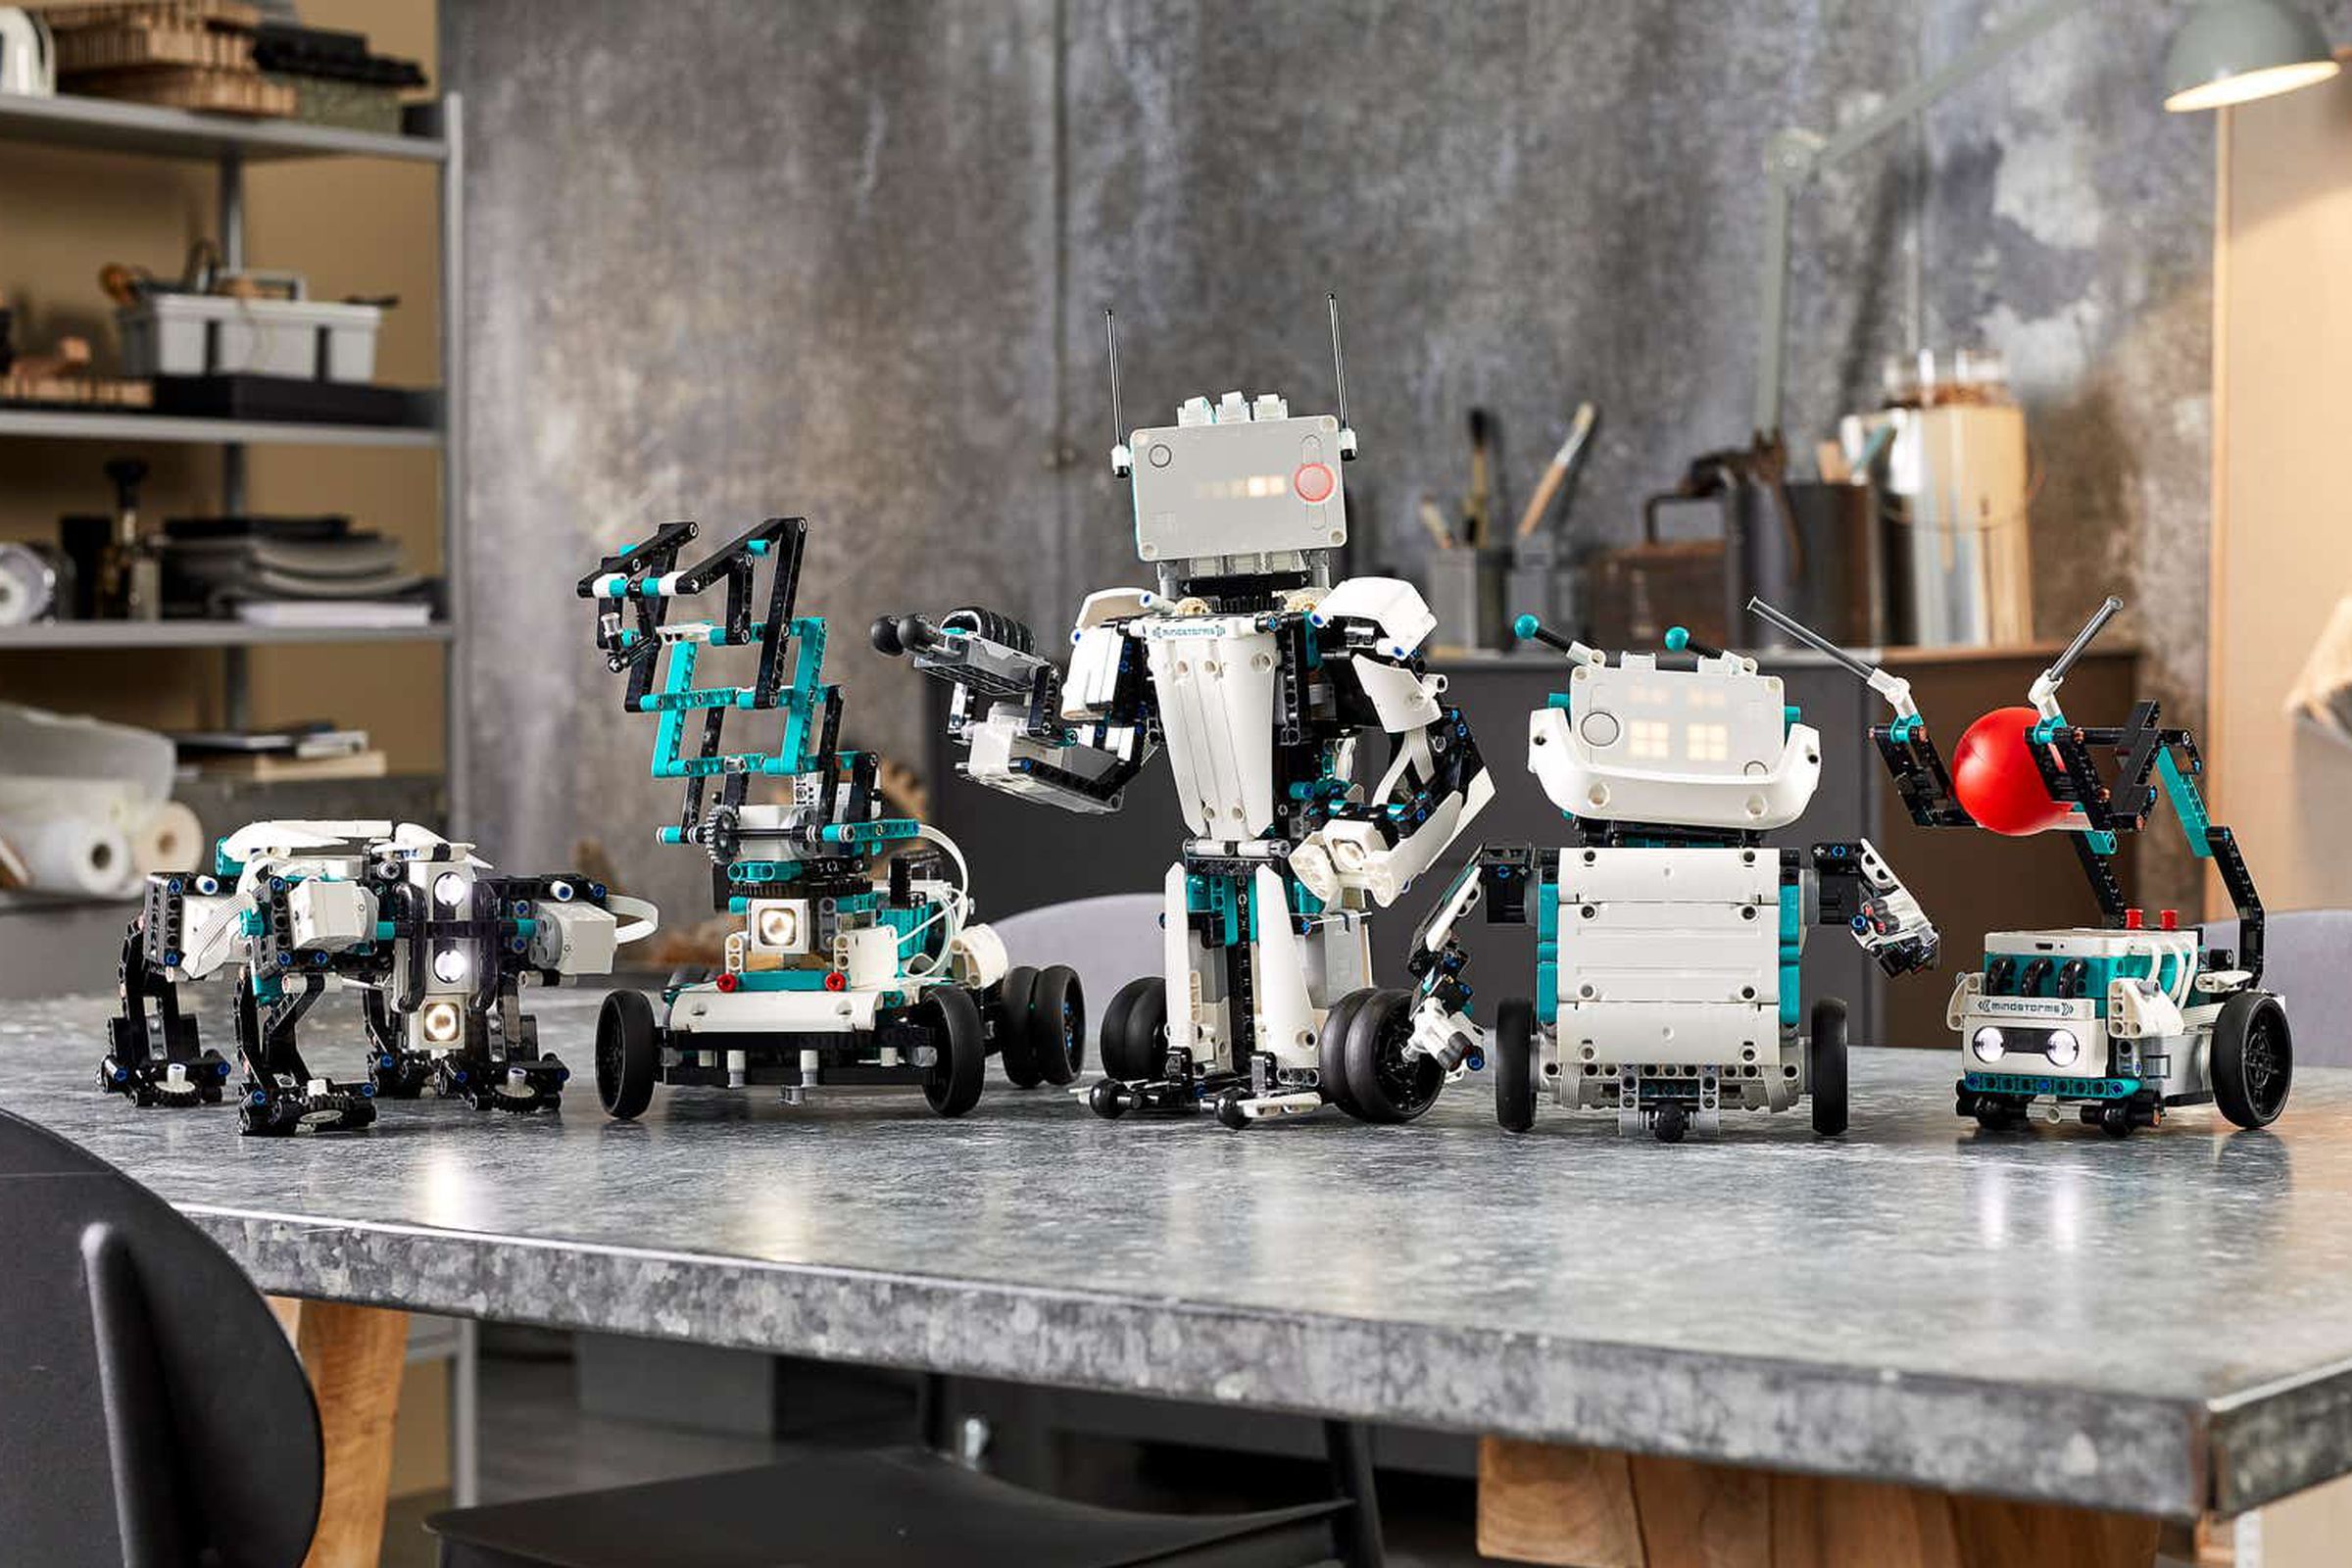 Image of five robots made out of Lego bricks.